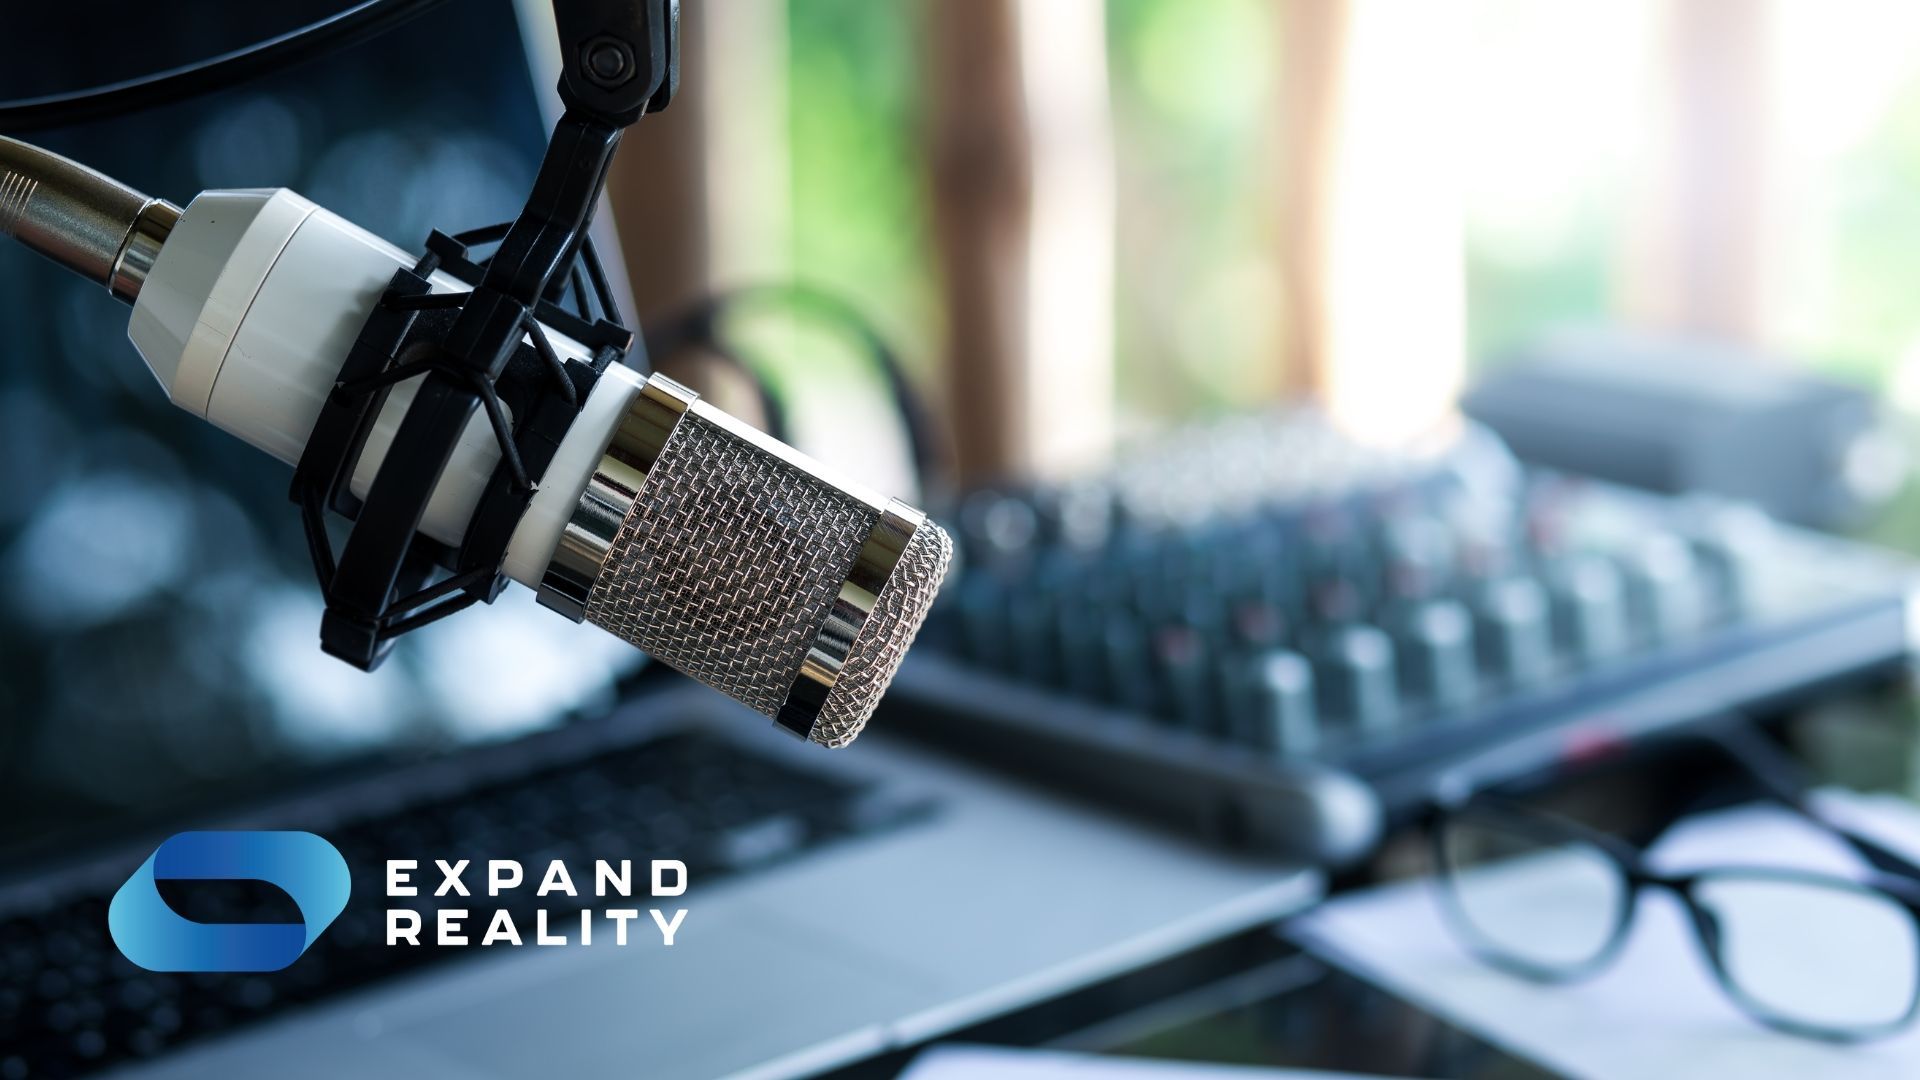 Podcasts are having a resurgence. But which are worth your time? Worry not. We've compiled a list of must-listen VR & AR podcasts to help you out.